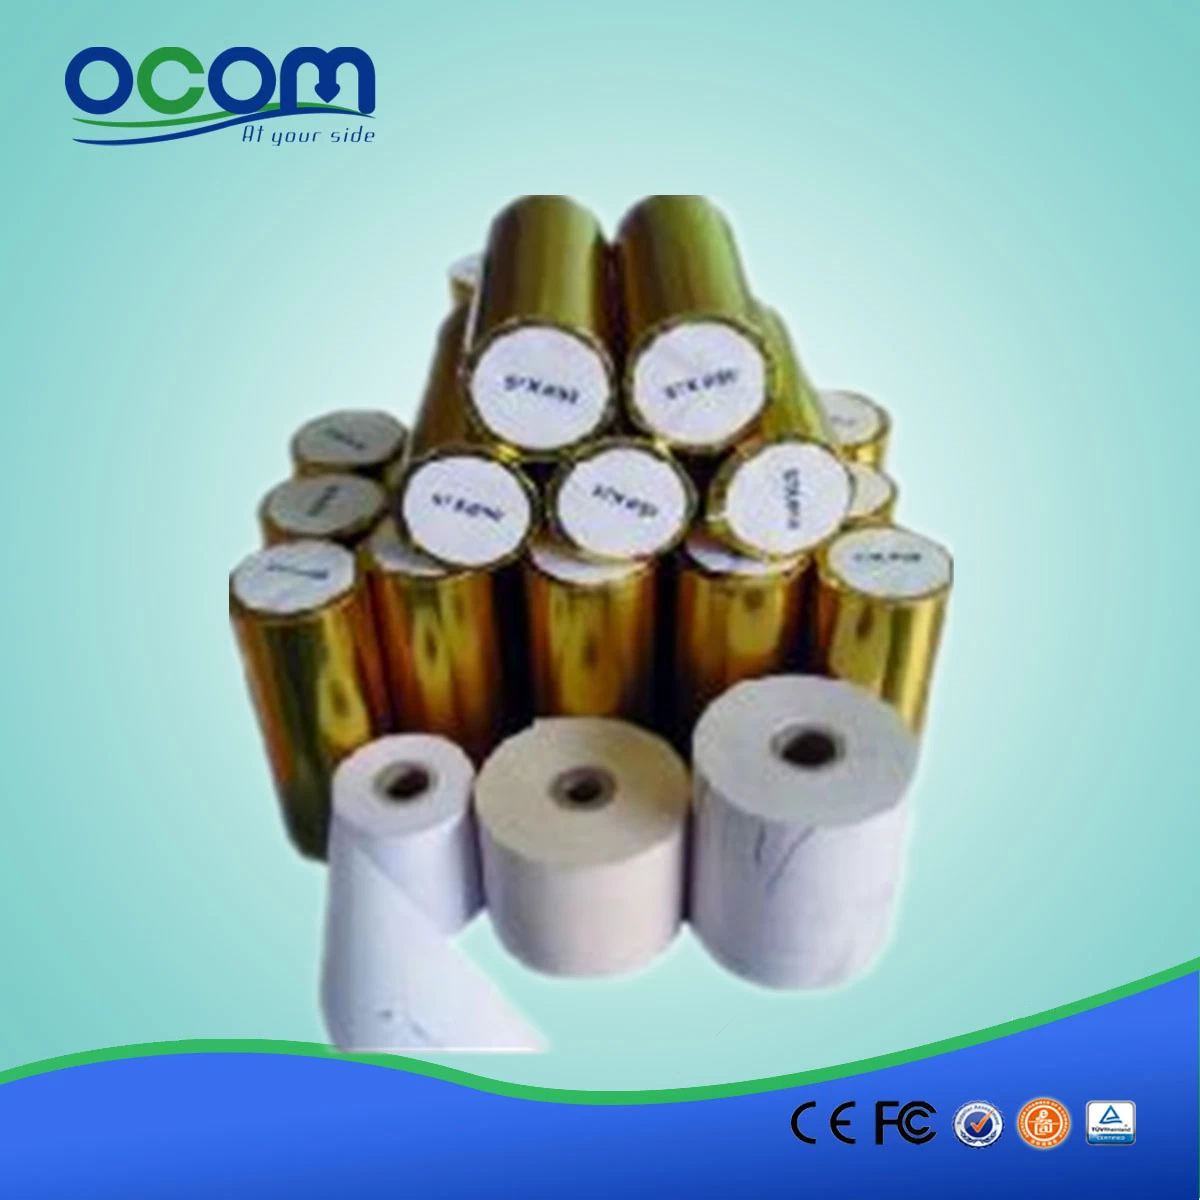 80mm 58mm Thermal Paper Roll for Thermal Printer